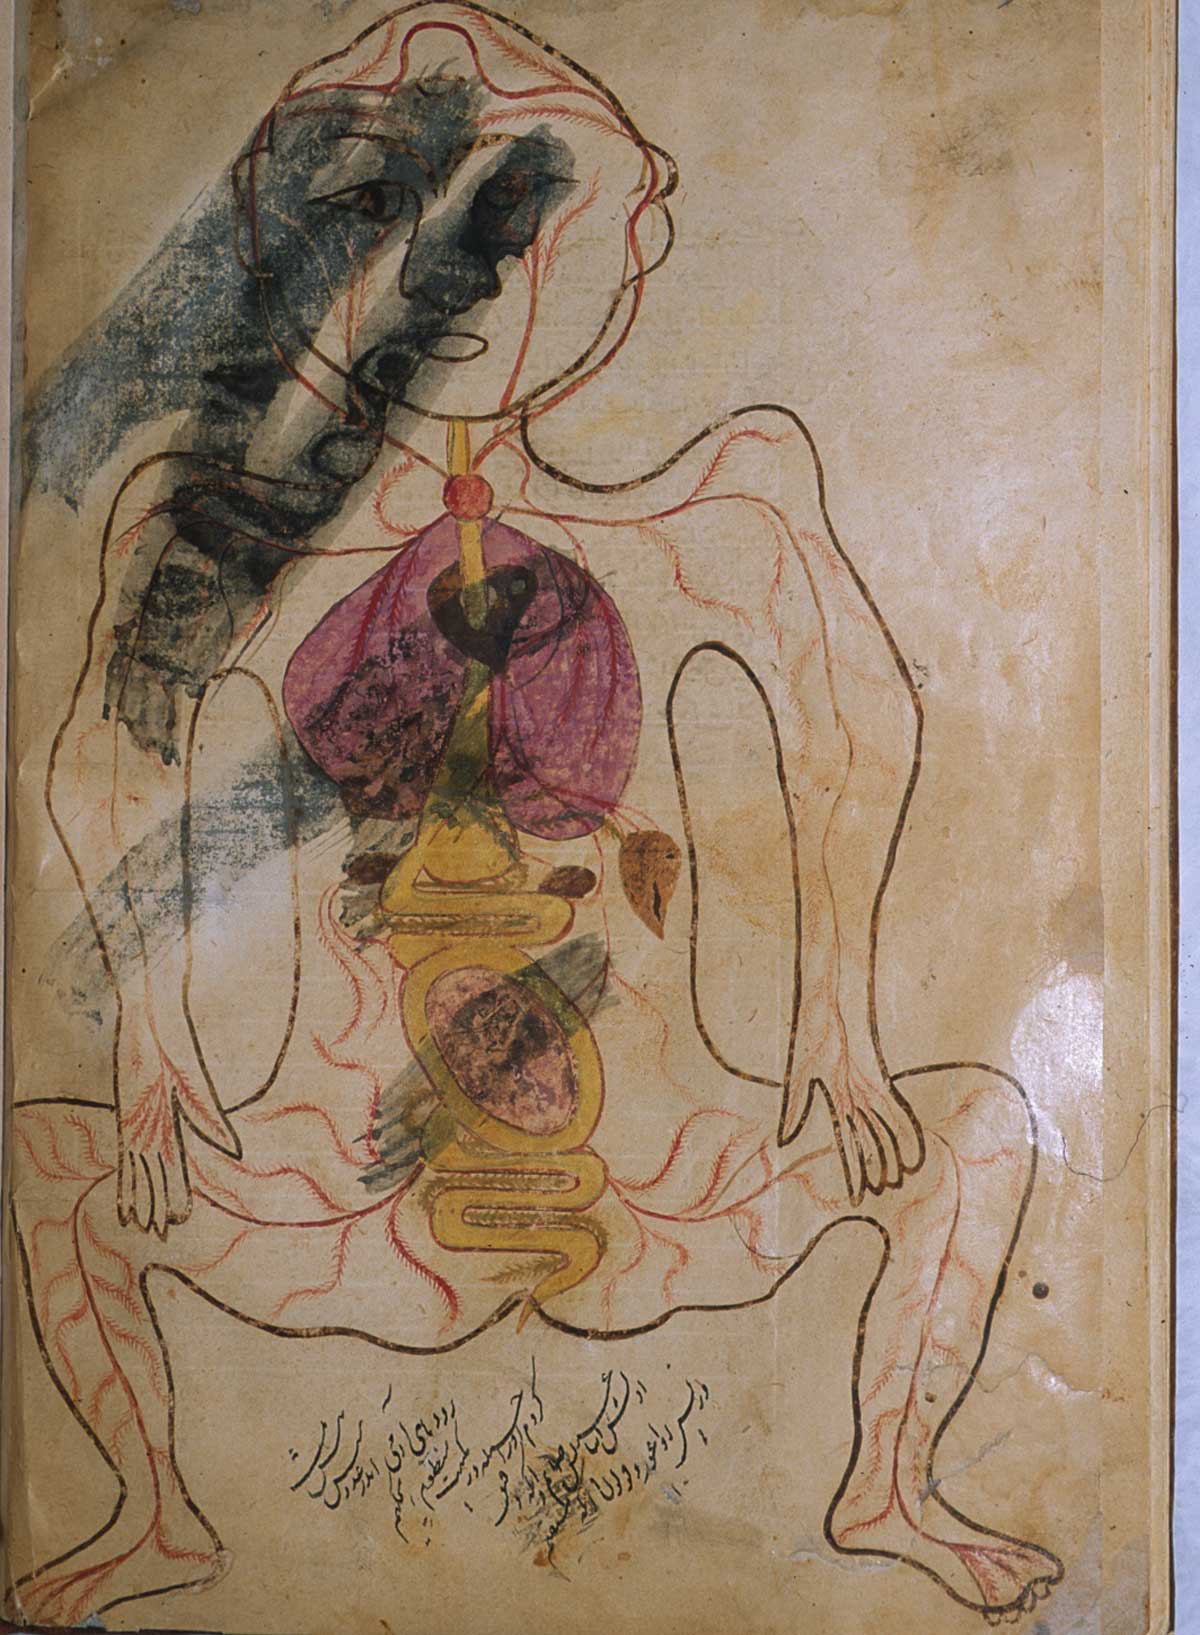 Folio 24b of Mansur ibn Ilyas' Tashrih-i badan-i insan, featuring the figure of a pregnant woman. This is essentially the arterial figure on which a gravid uterus with the foetus in a breech or transverse position has been superimposed. The illustration is slightly defaced.